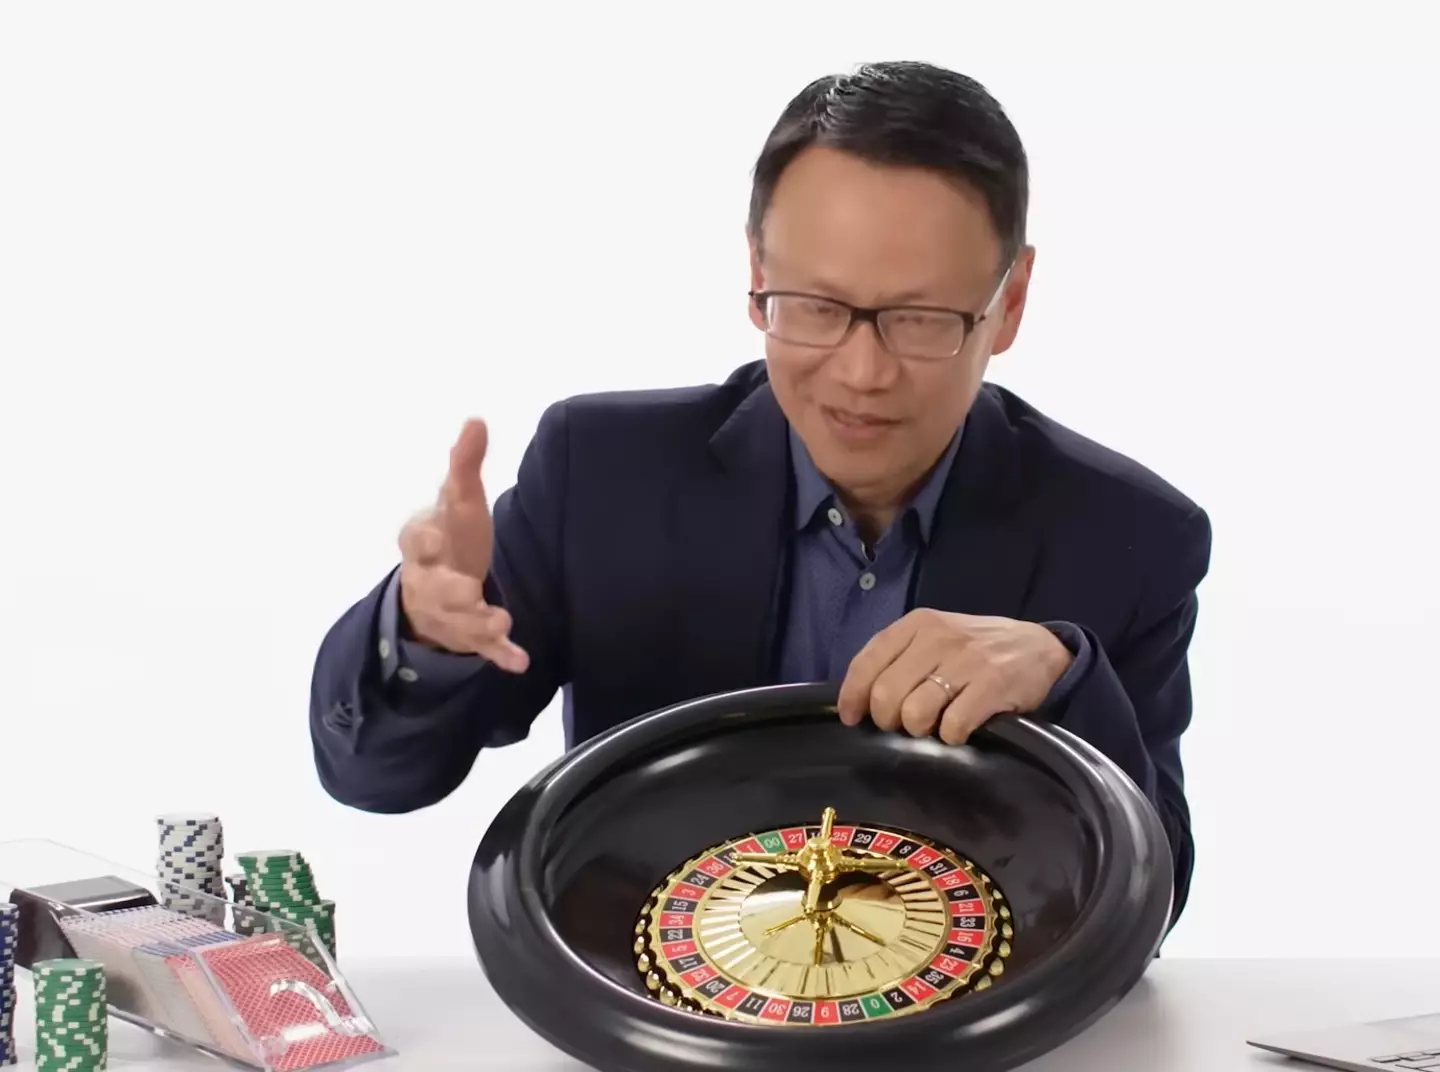 The expert explained how roulette tables are always stacked in the house's favour.